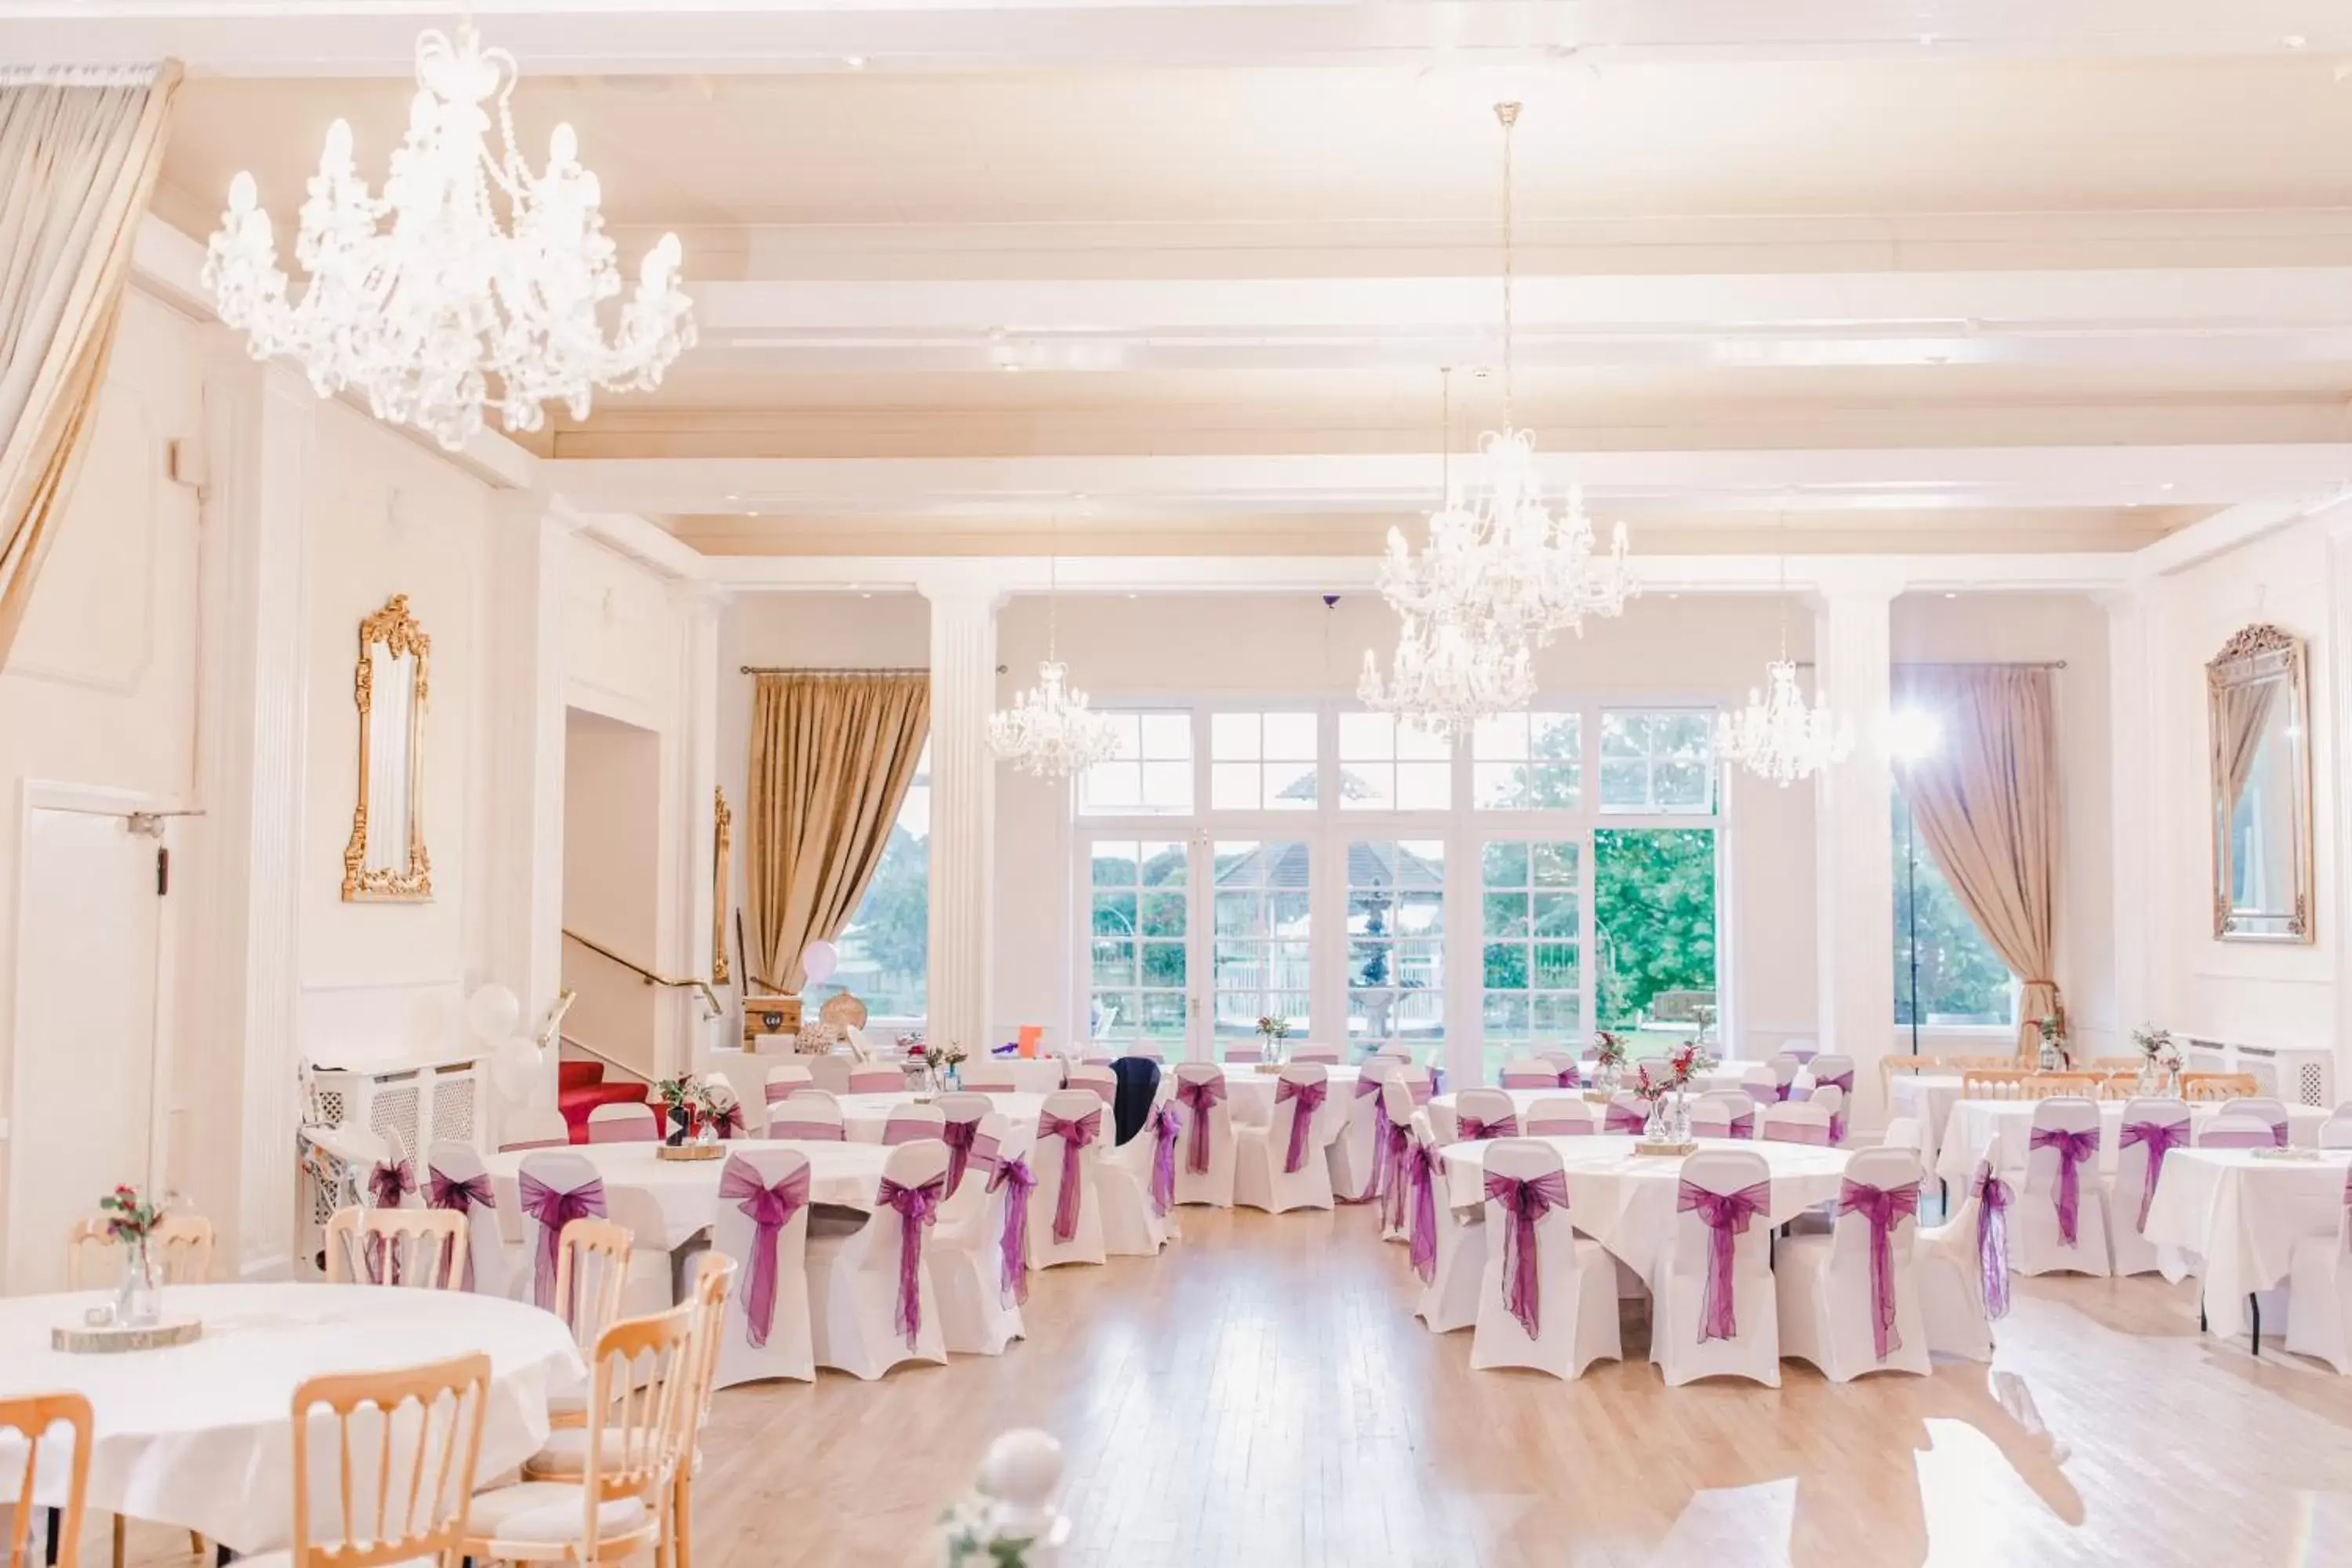 Banquet/Function facilities, Banquet Facilities in Ednam House Hotel